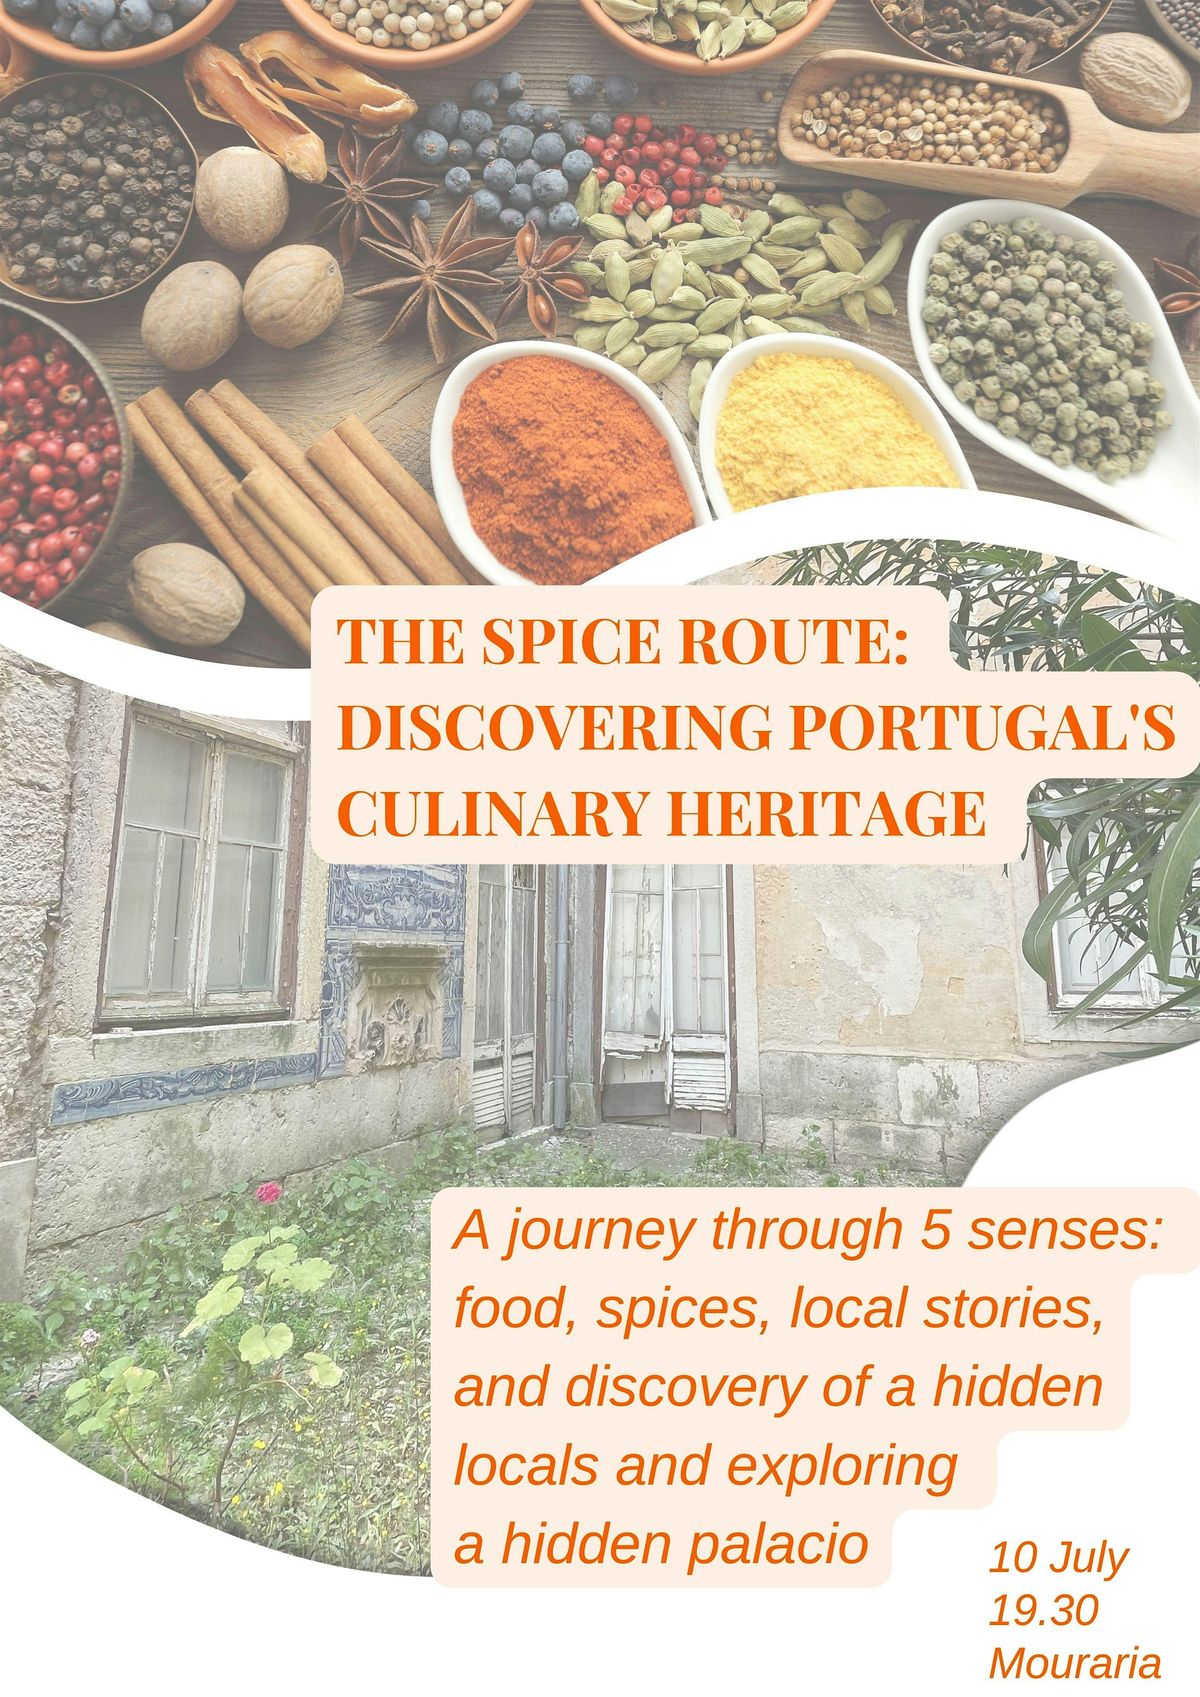 The Spice Route: Discovering Portugal's Culinary Heritage